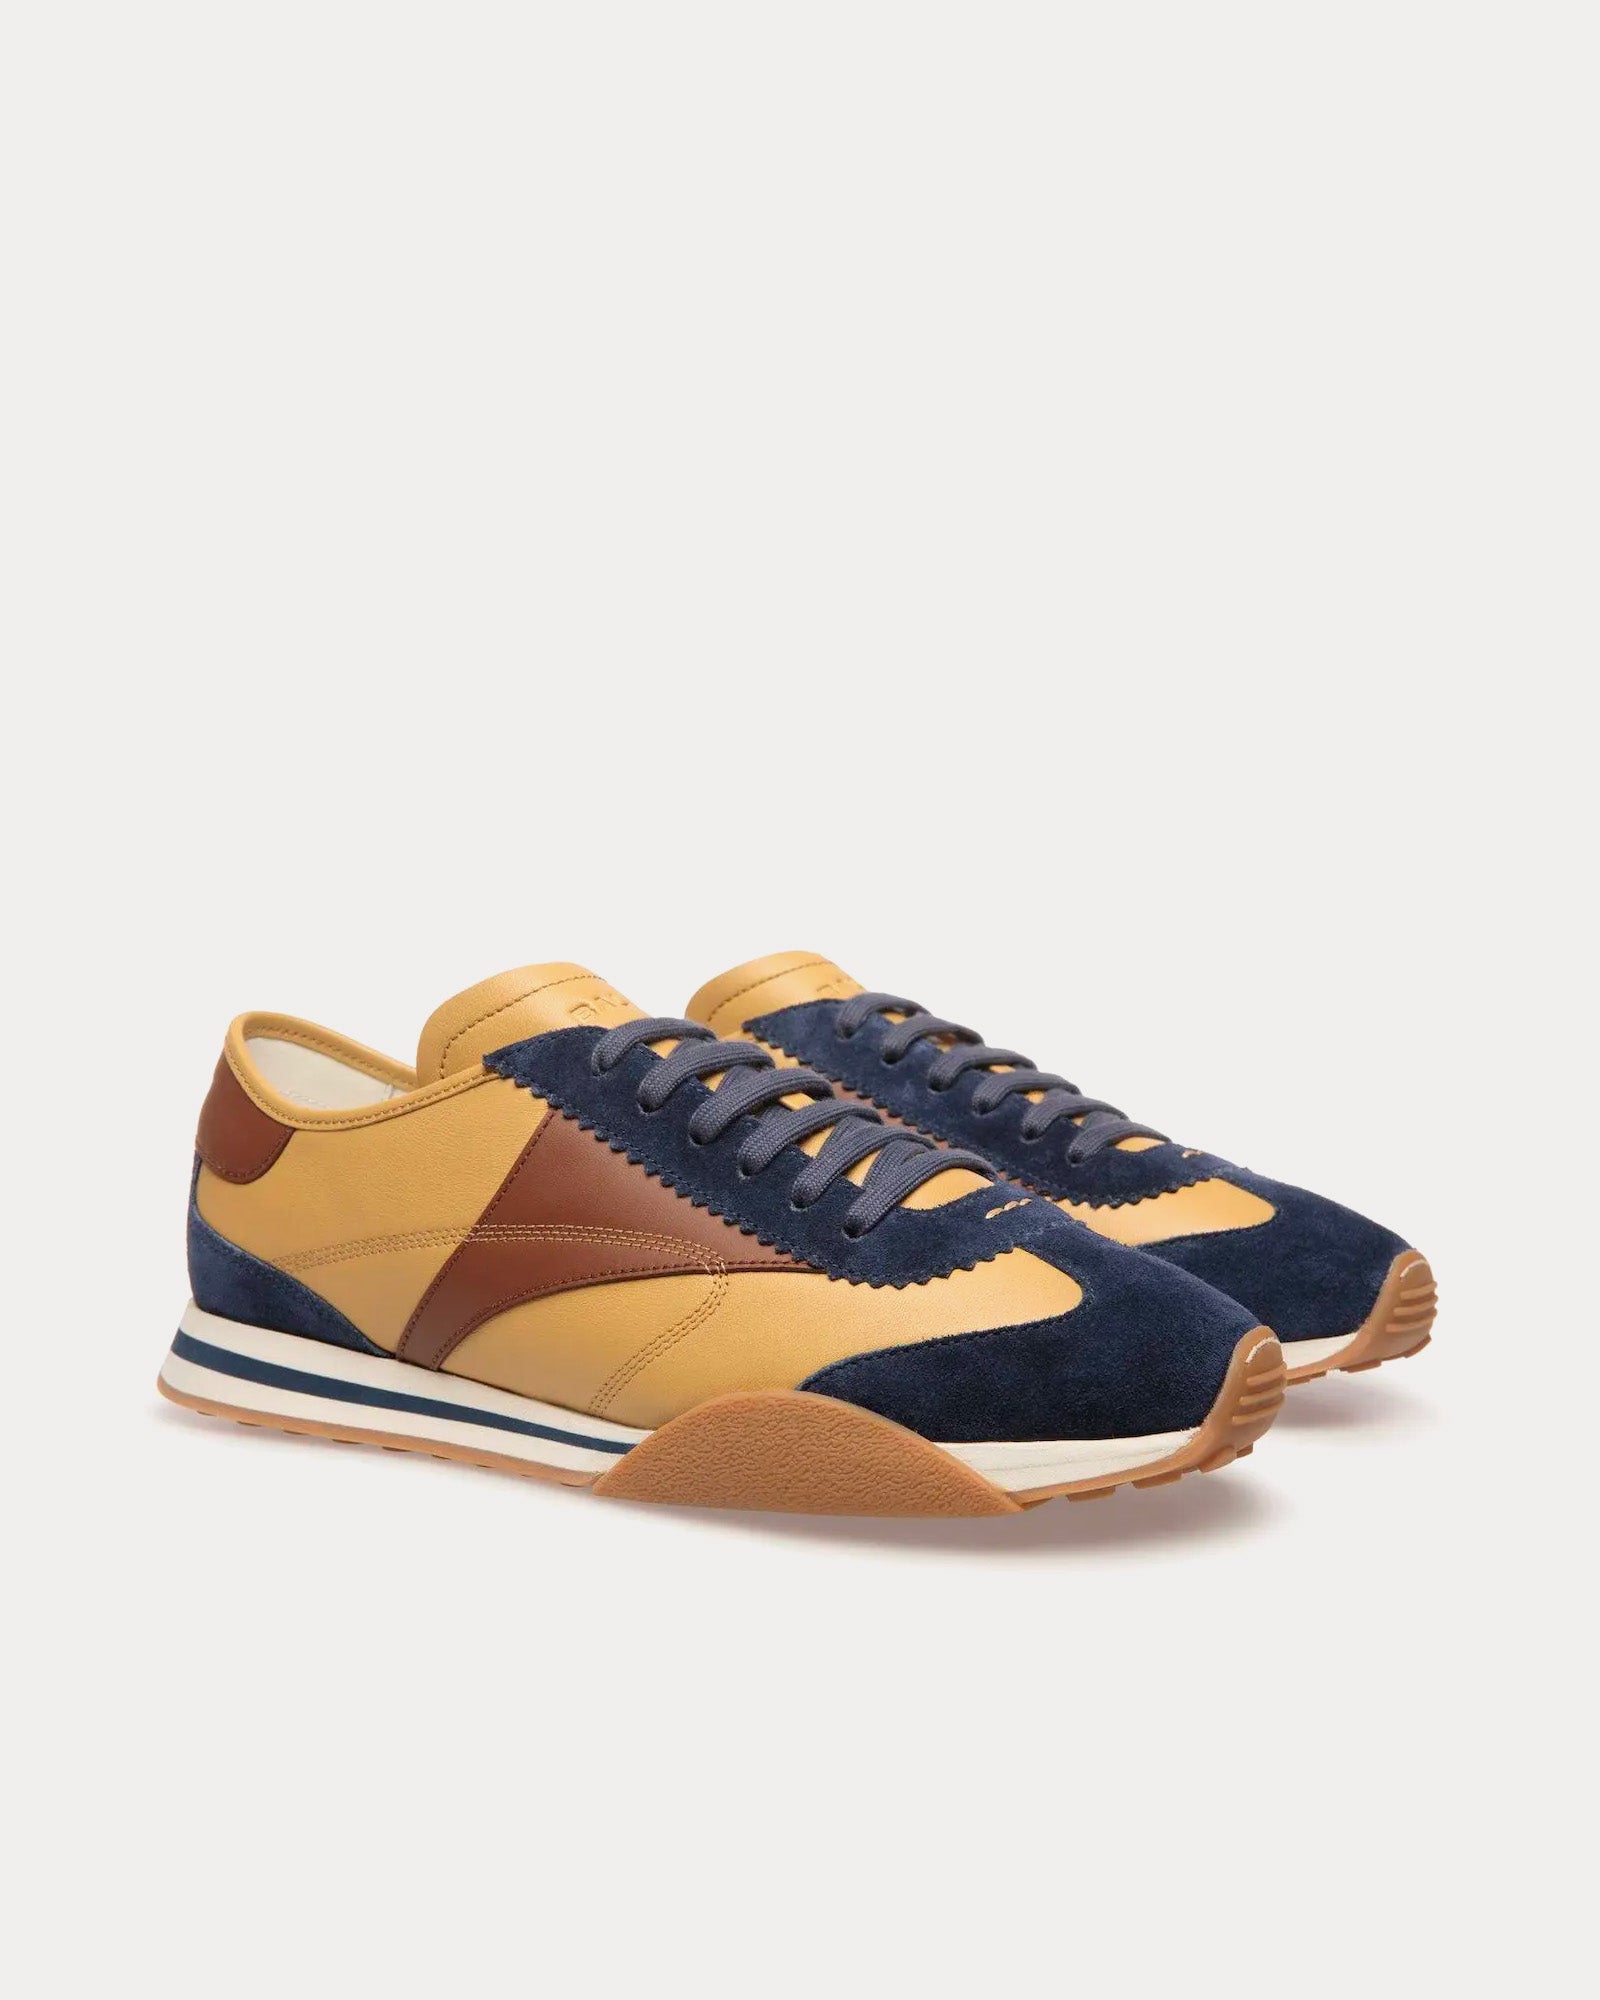 Bally - Sussex Leather & Fabric Brown / Navy Low Top Sneakers